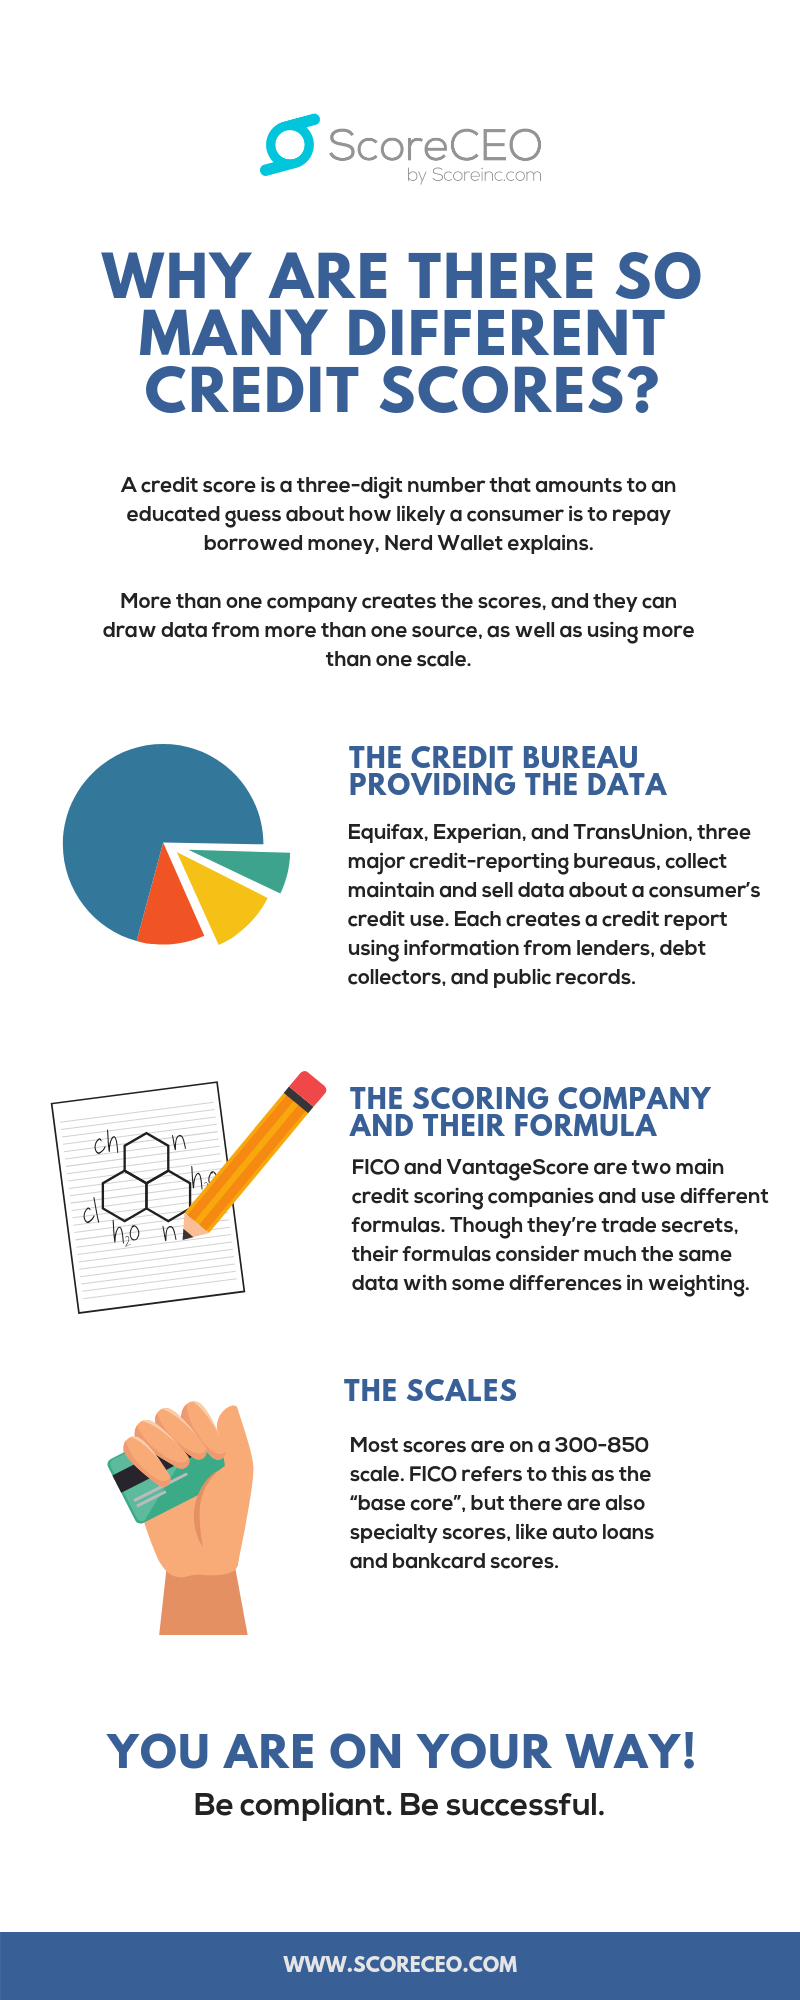 Why are there so many different credit scores?